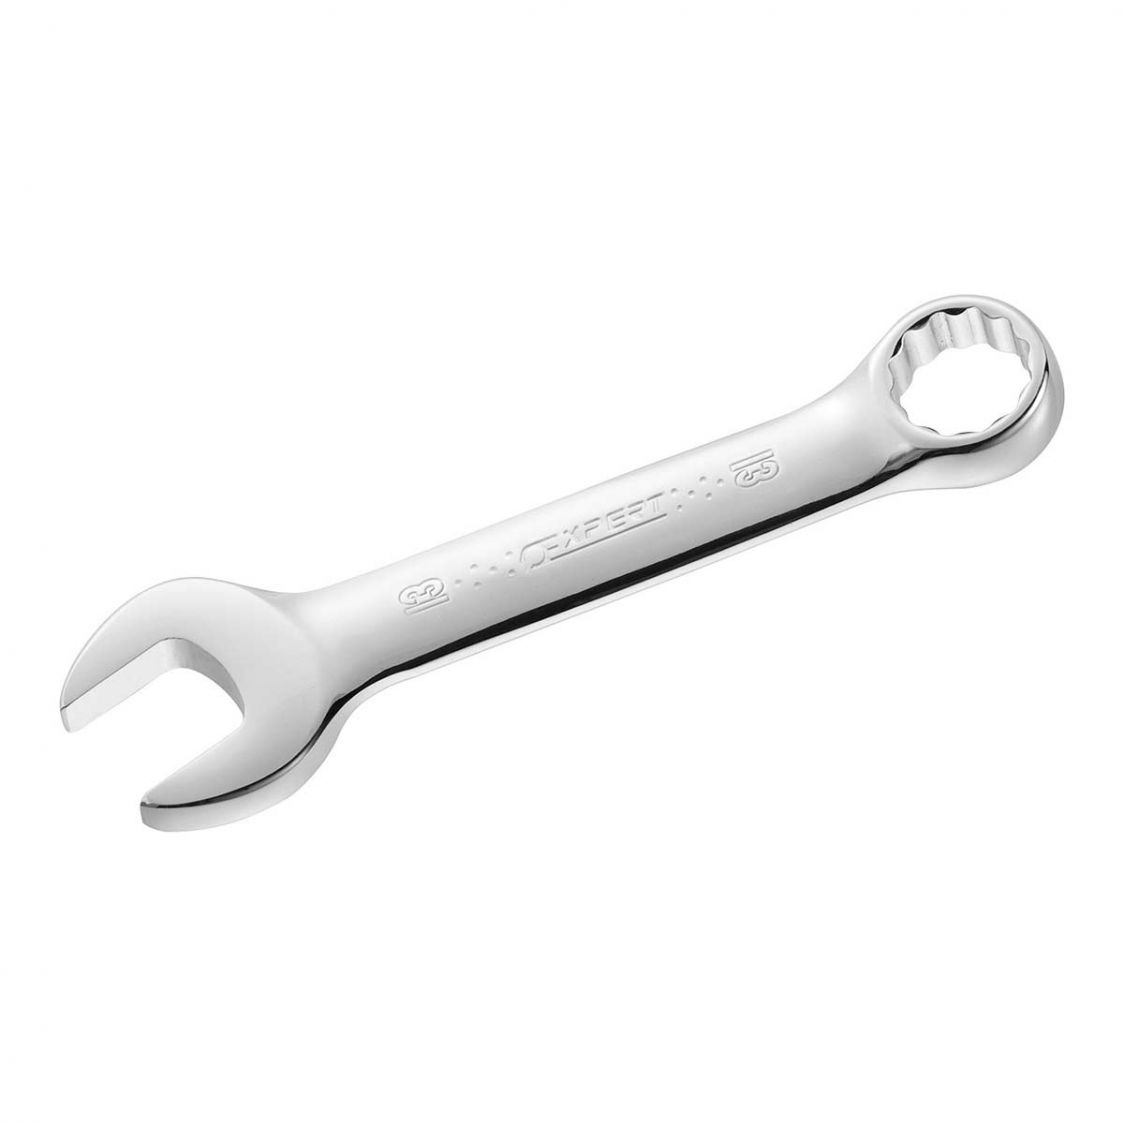 EXPERT by FACOM E110110 - 14mm Metric Stubby Combination Spanner